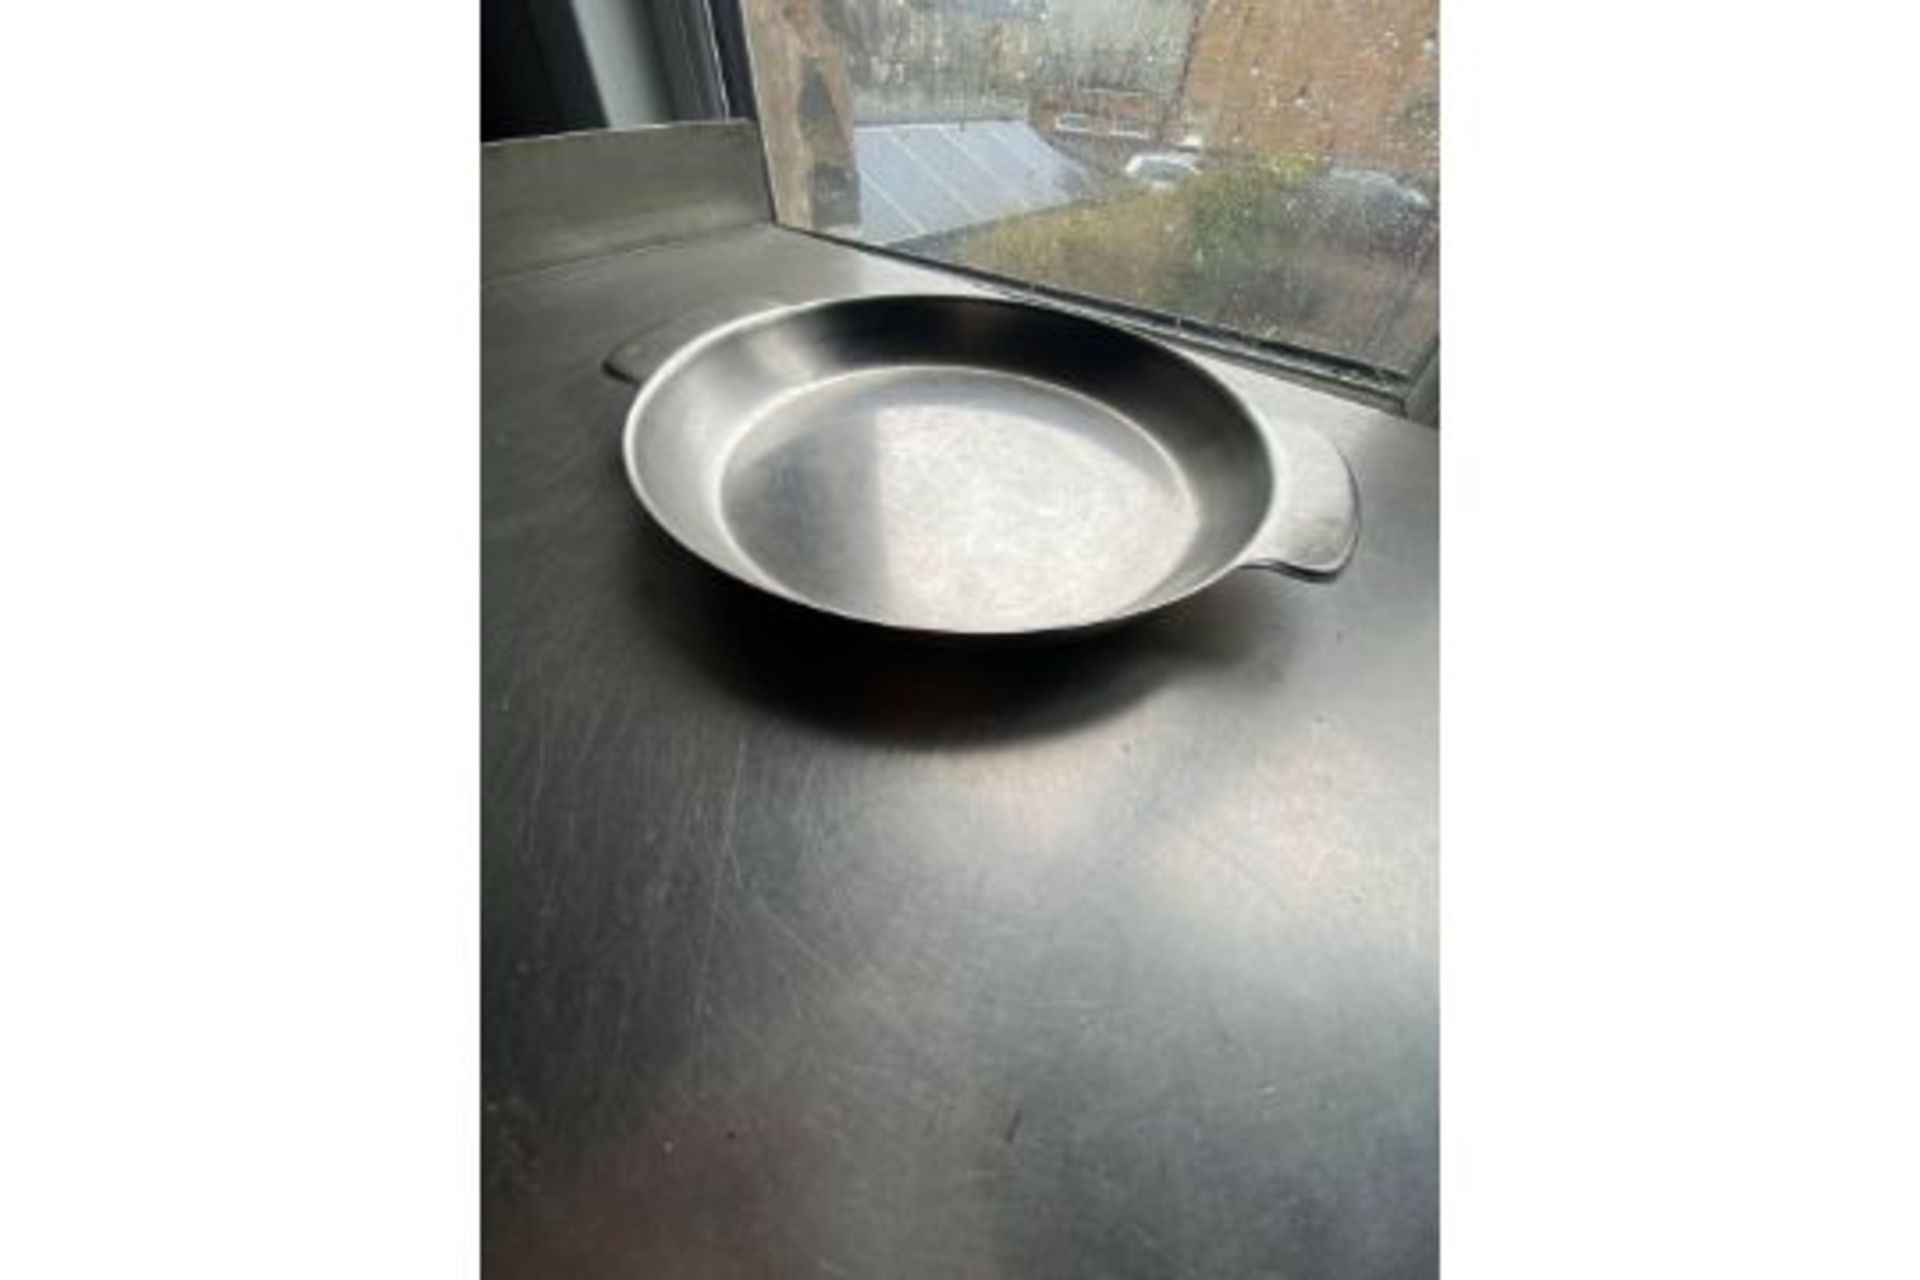 Indian Cuisine Kitchen Equipment And Crockery - Image 20 of 22